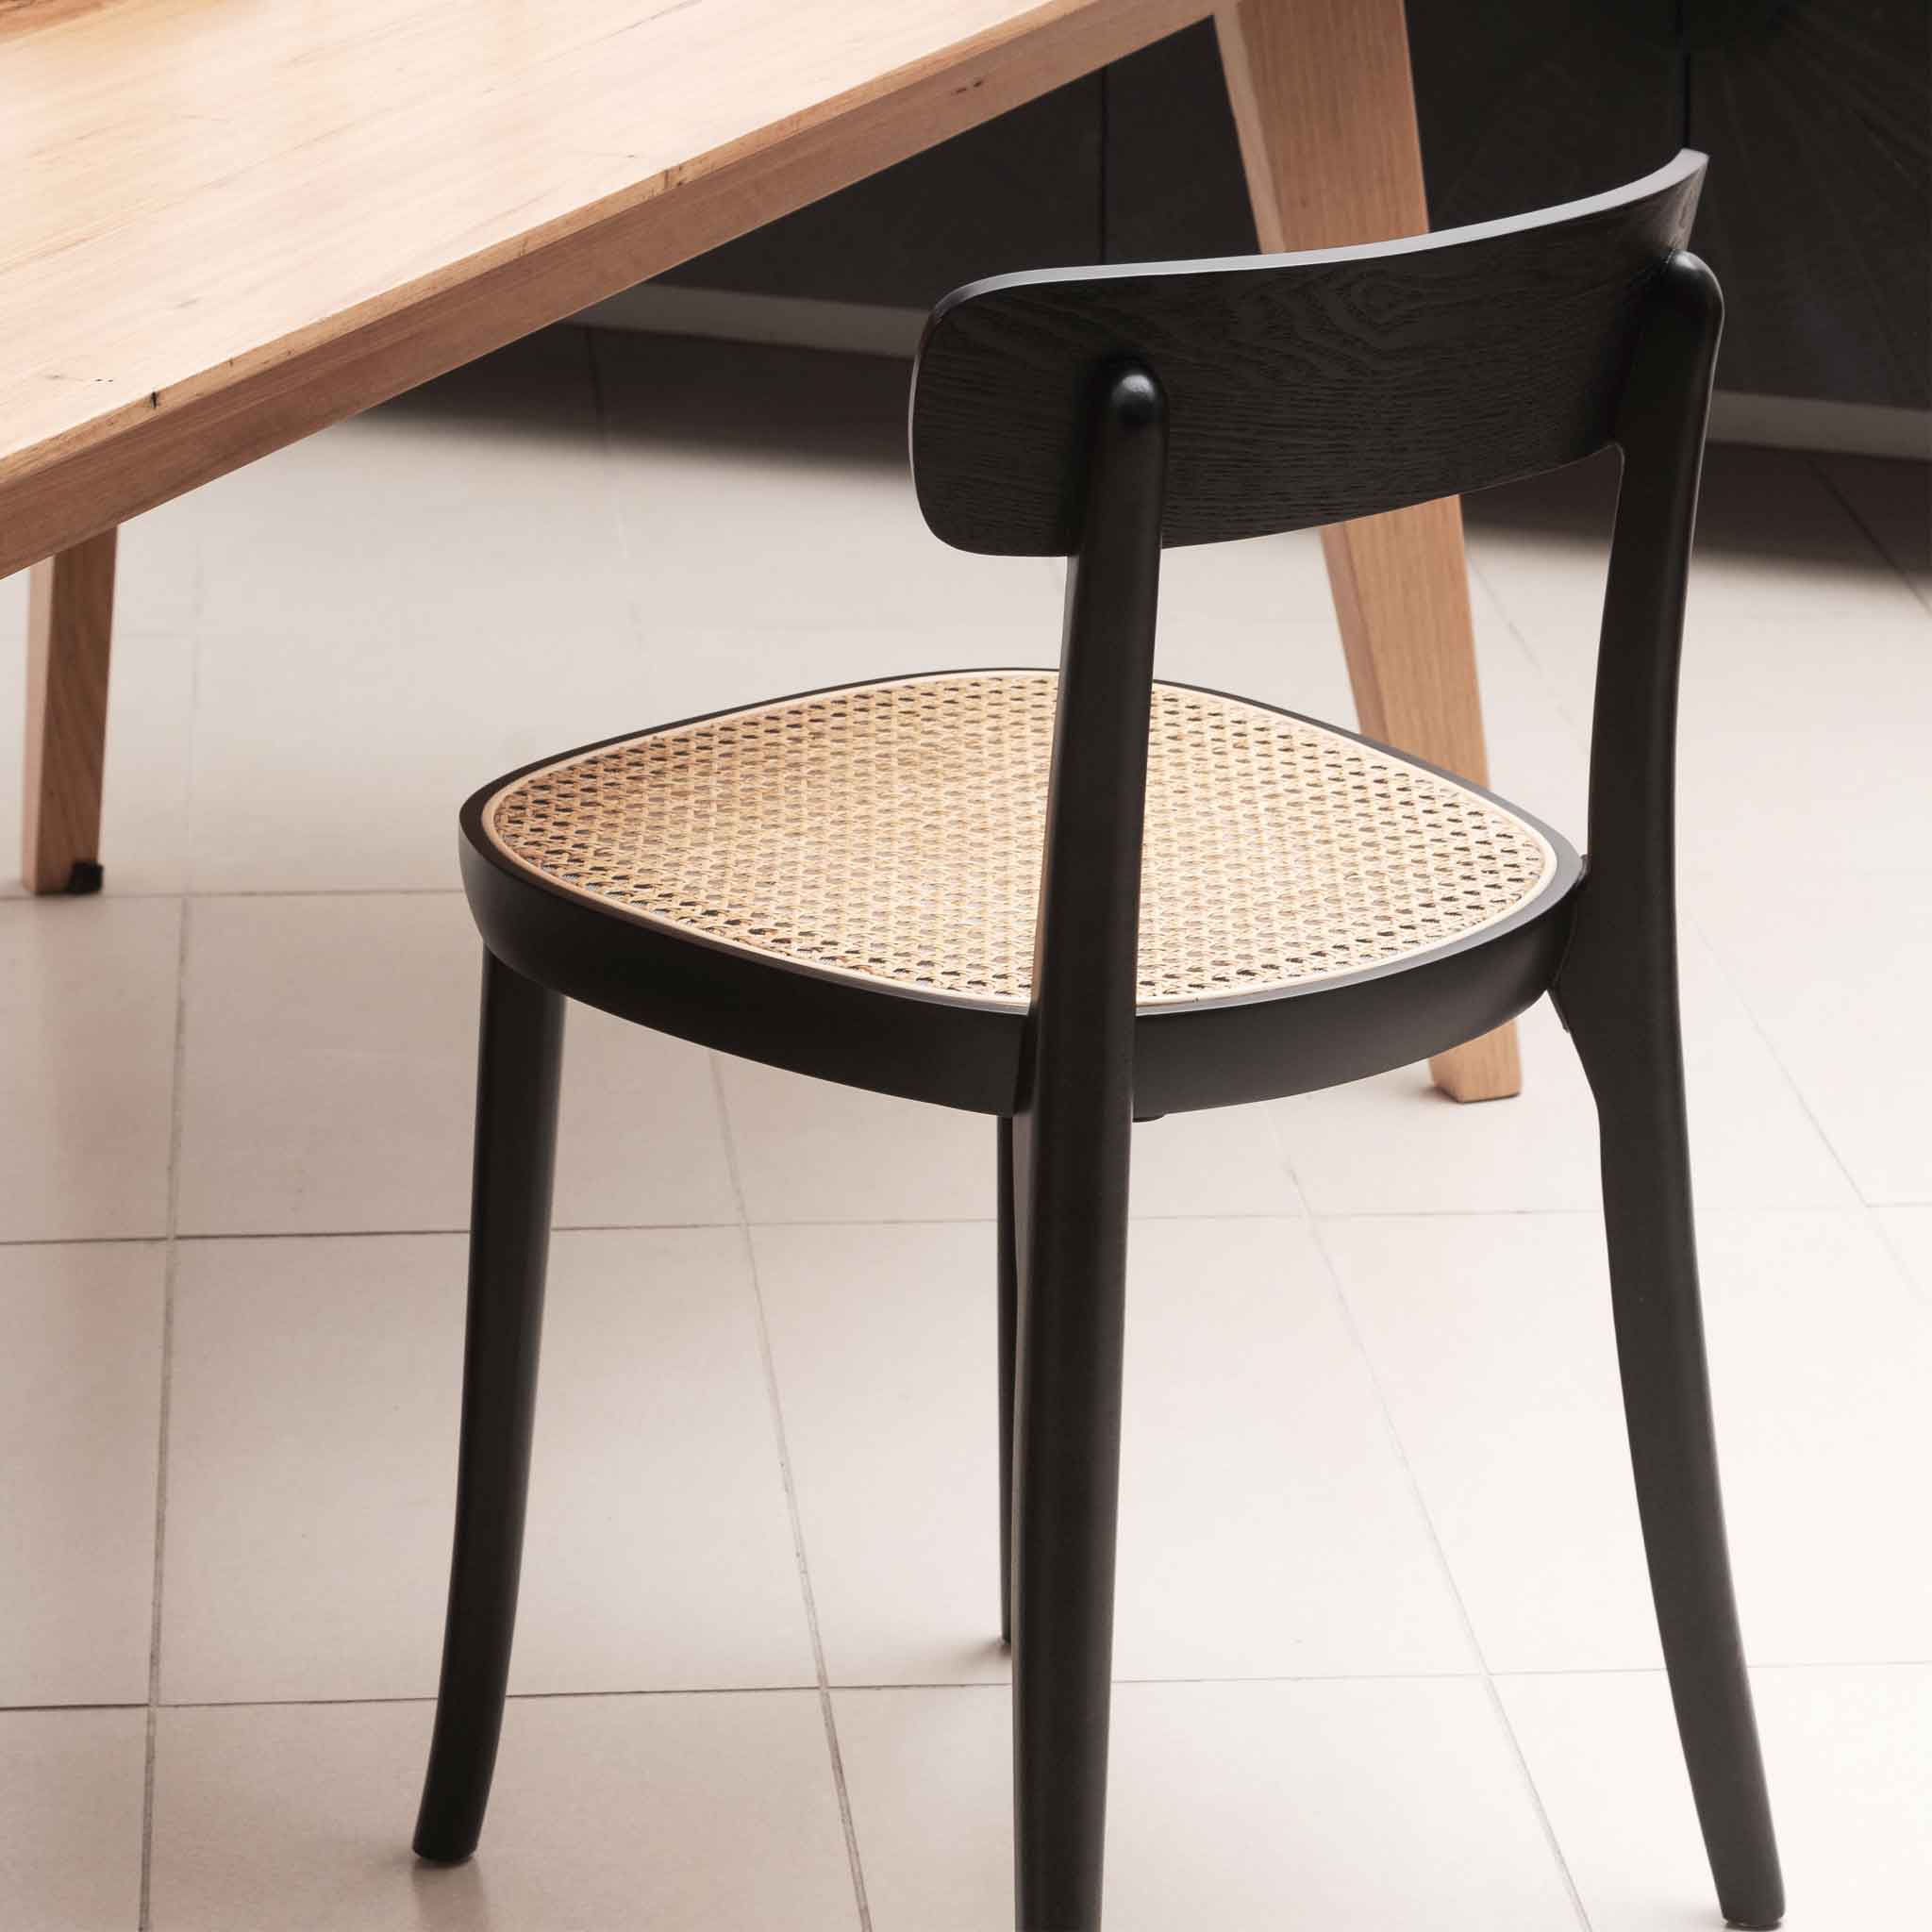 Adam Rattan Dining Chair - Black with Rattan Seat - Dining Chairs